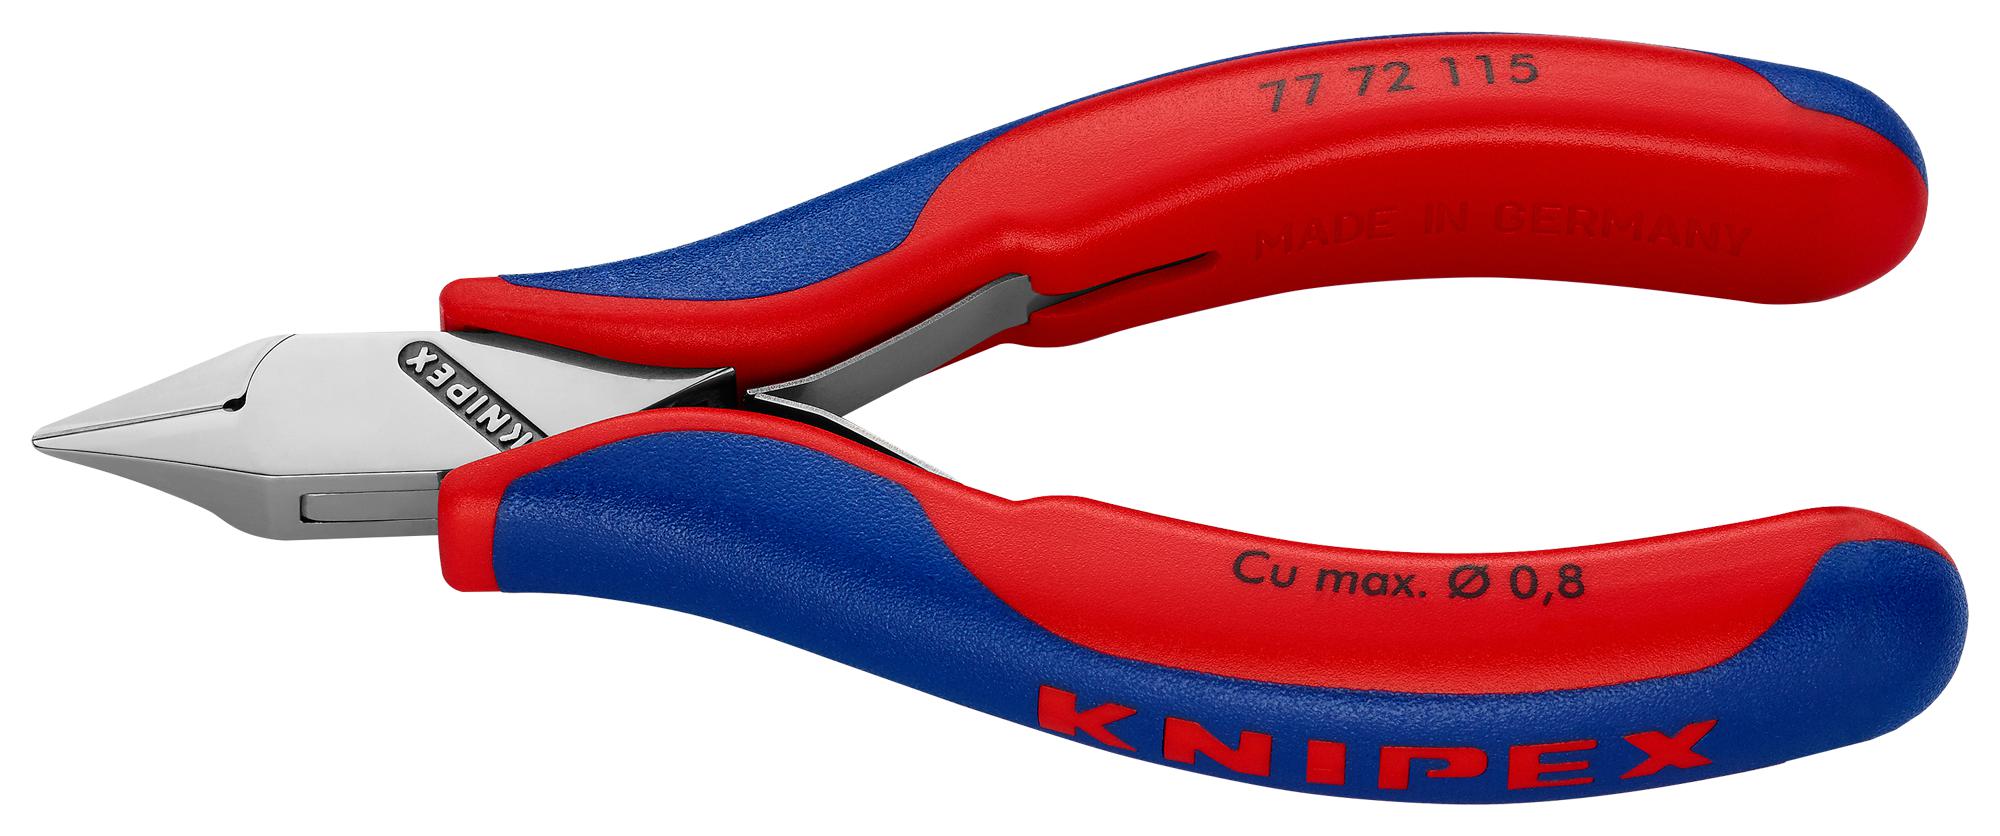 77 72 115 CUTTER, RED HANDLES KNIPEX